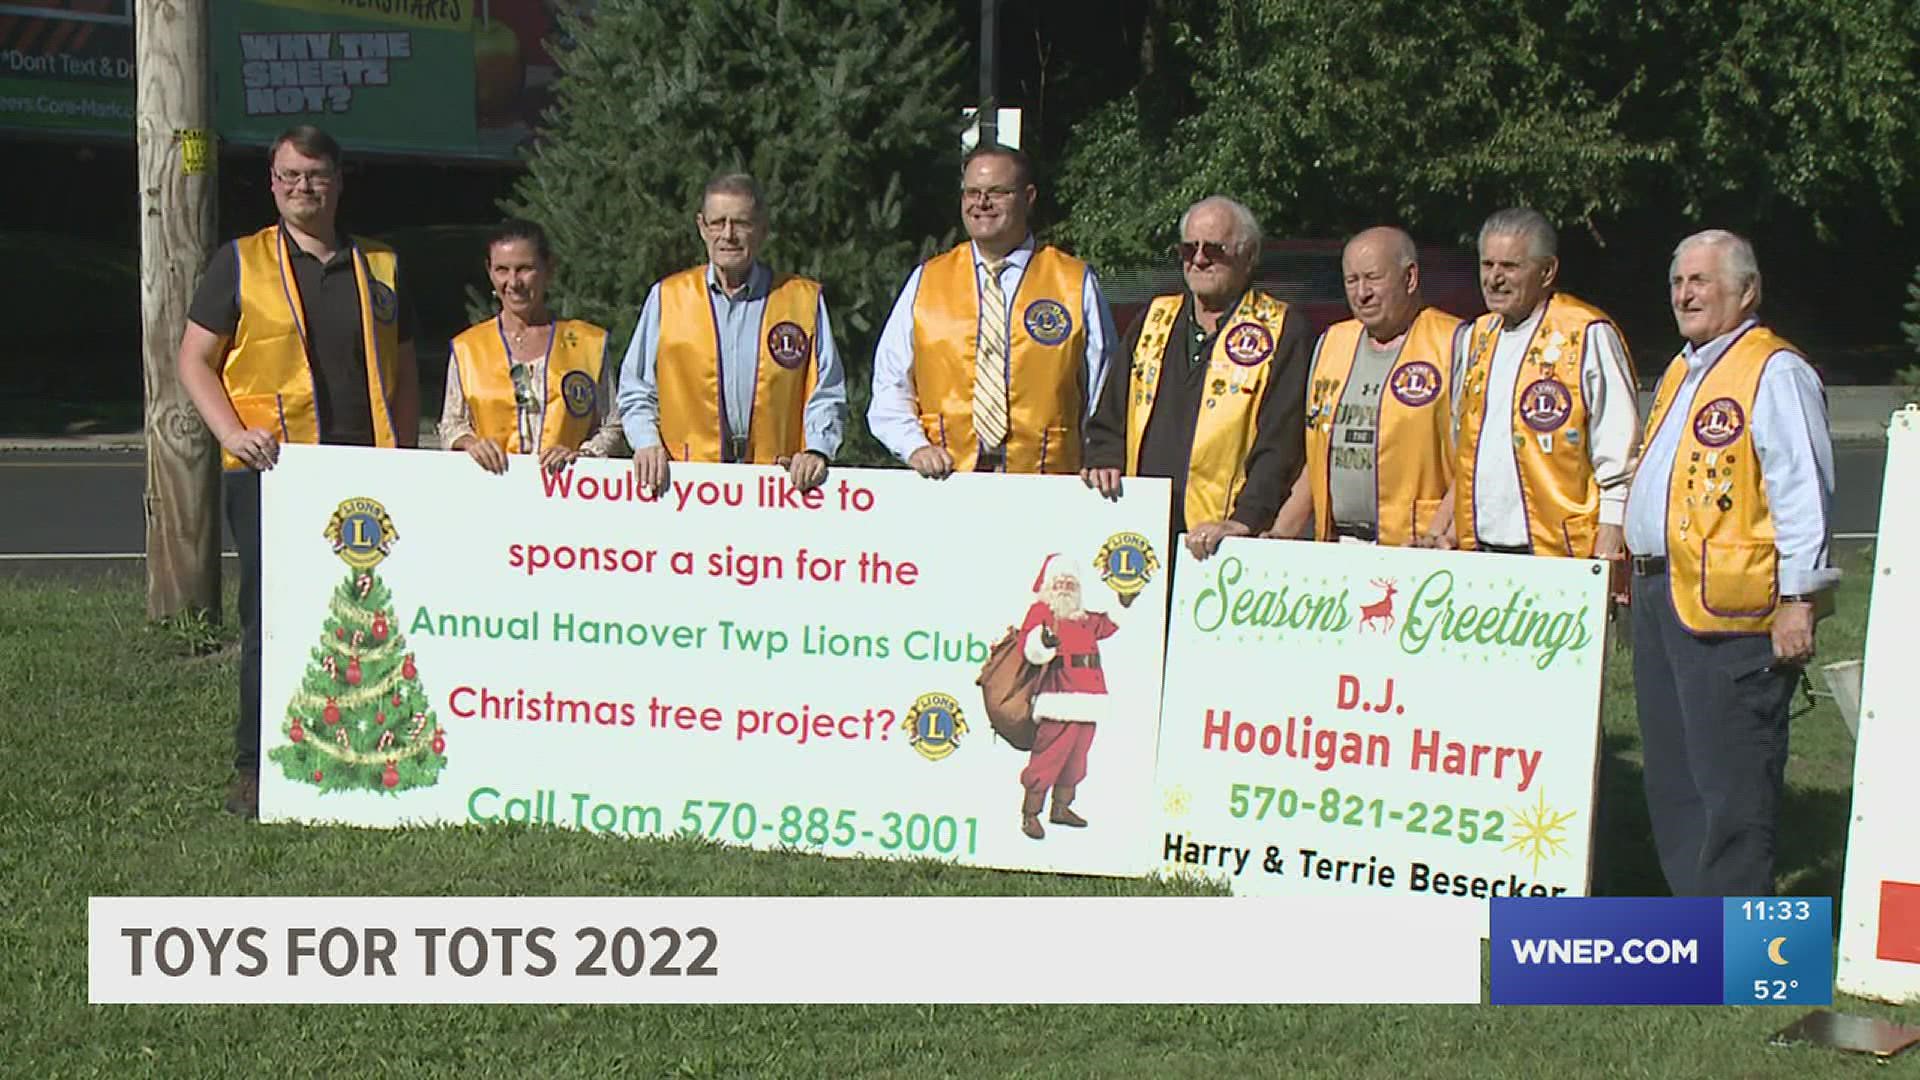 The Hanover Township Lions Club shows us it's never too early to start thinking about the holidays.